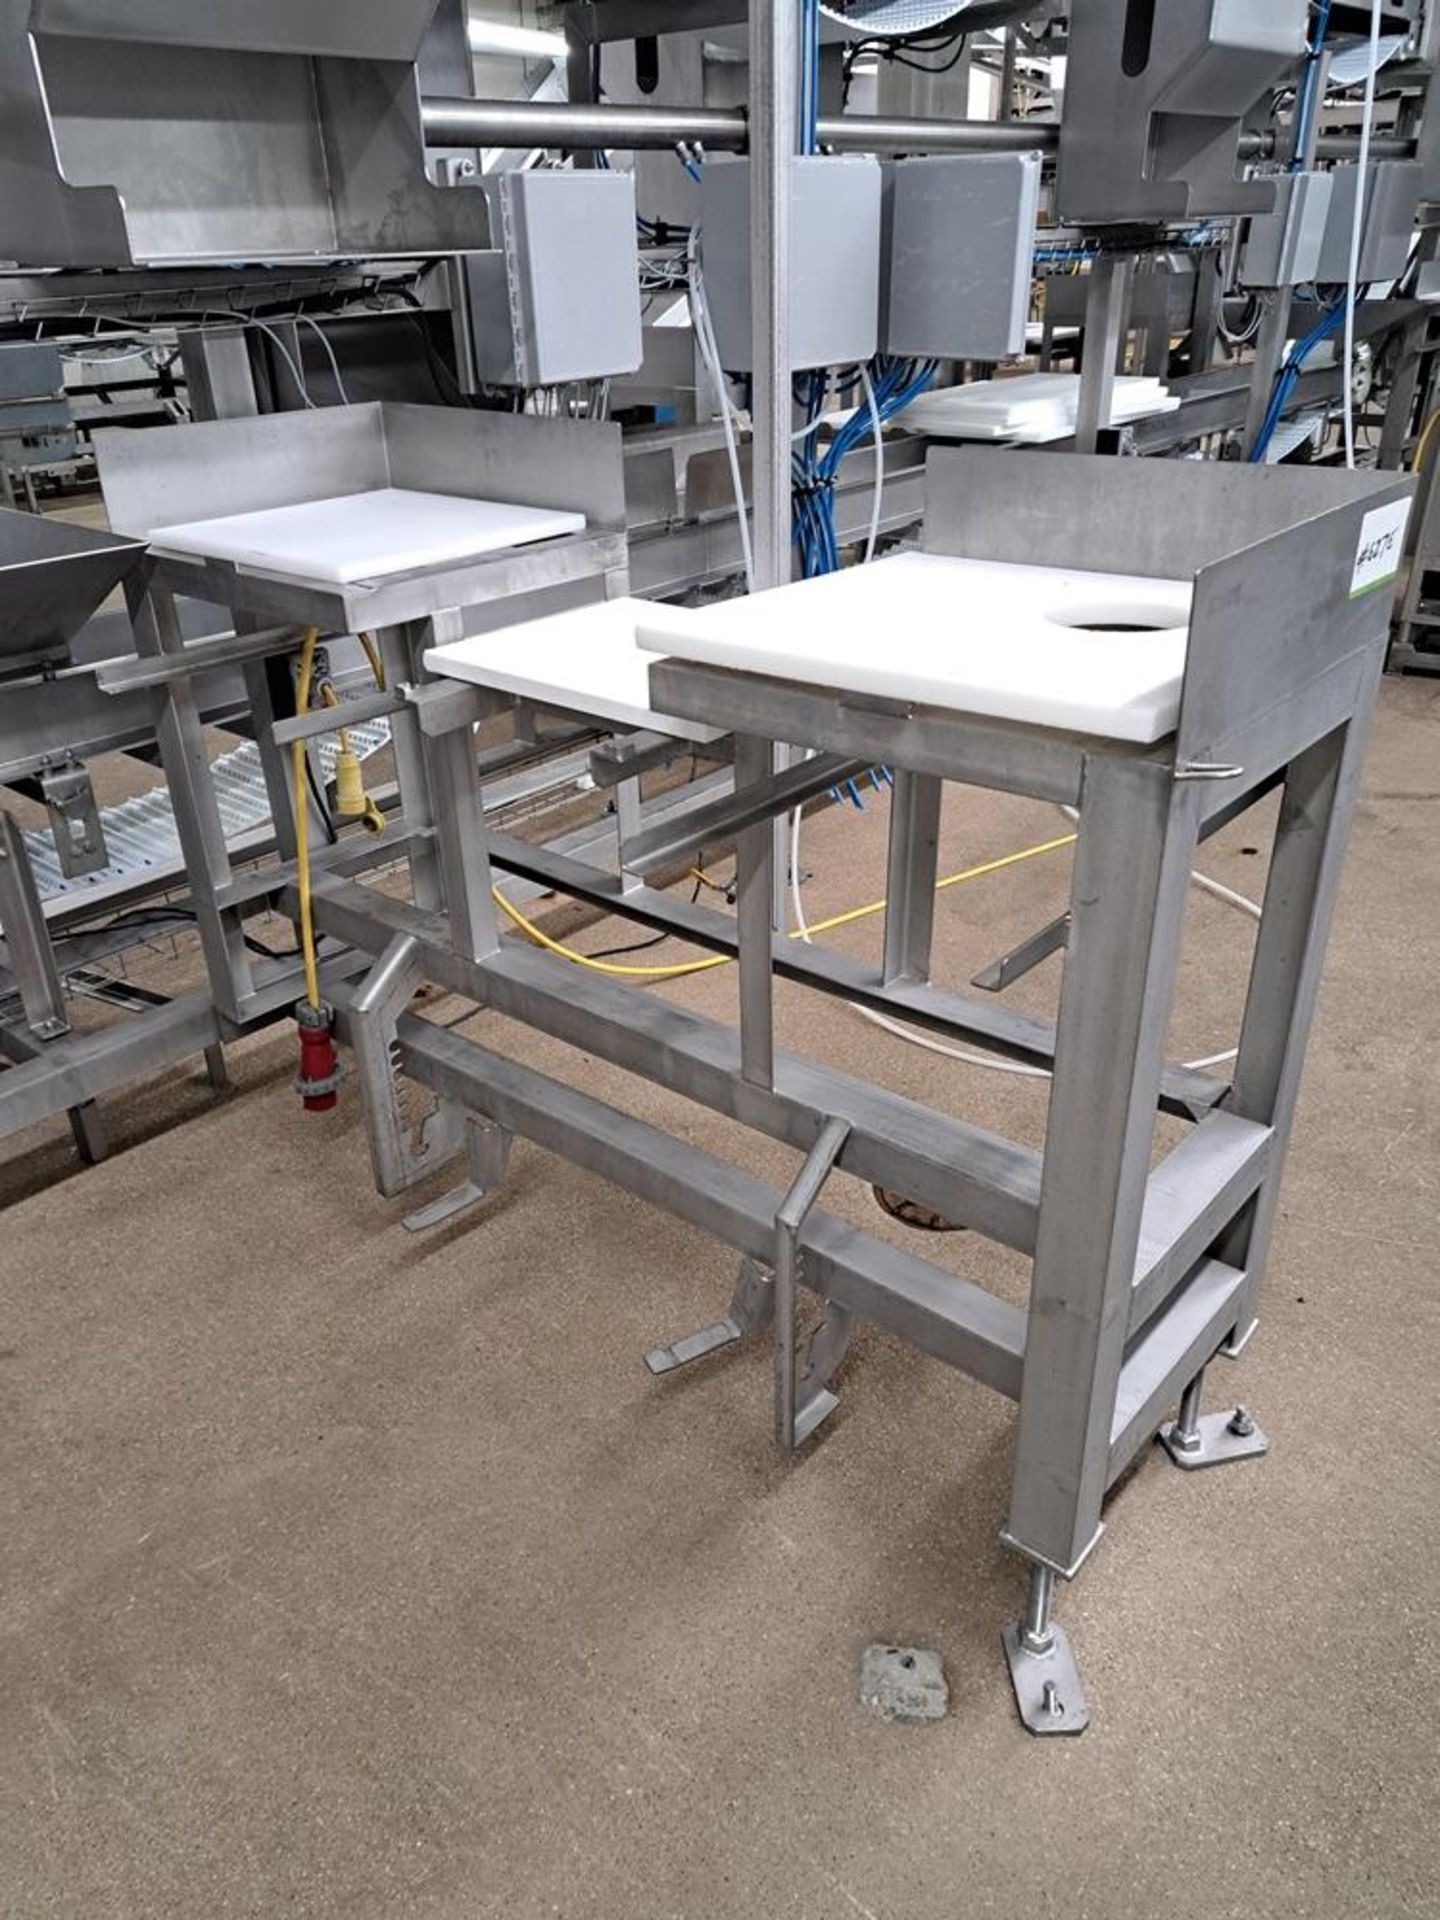 Stainless Steel Work Station, 22" W X 64" L with platform: Required Loading Fee $150.00, Rigger-Norm